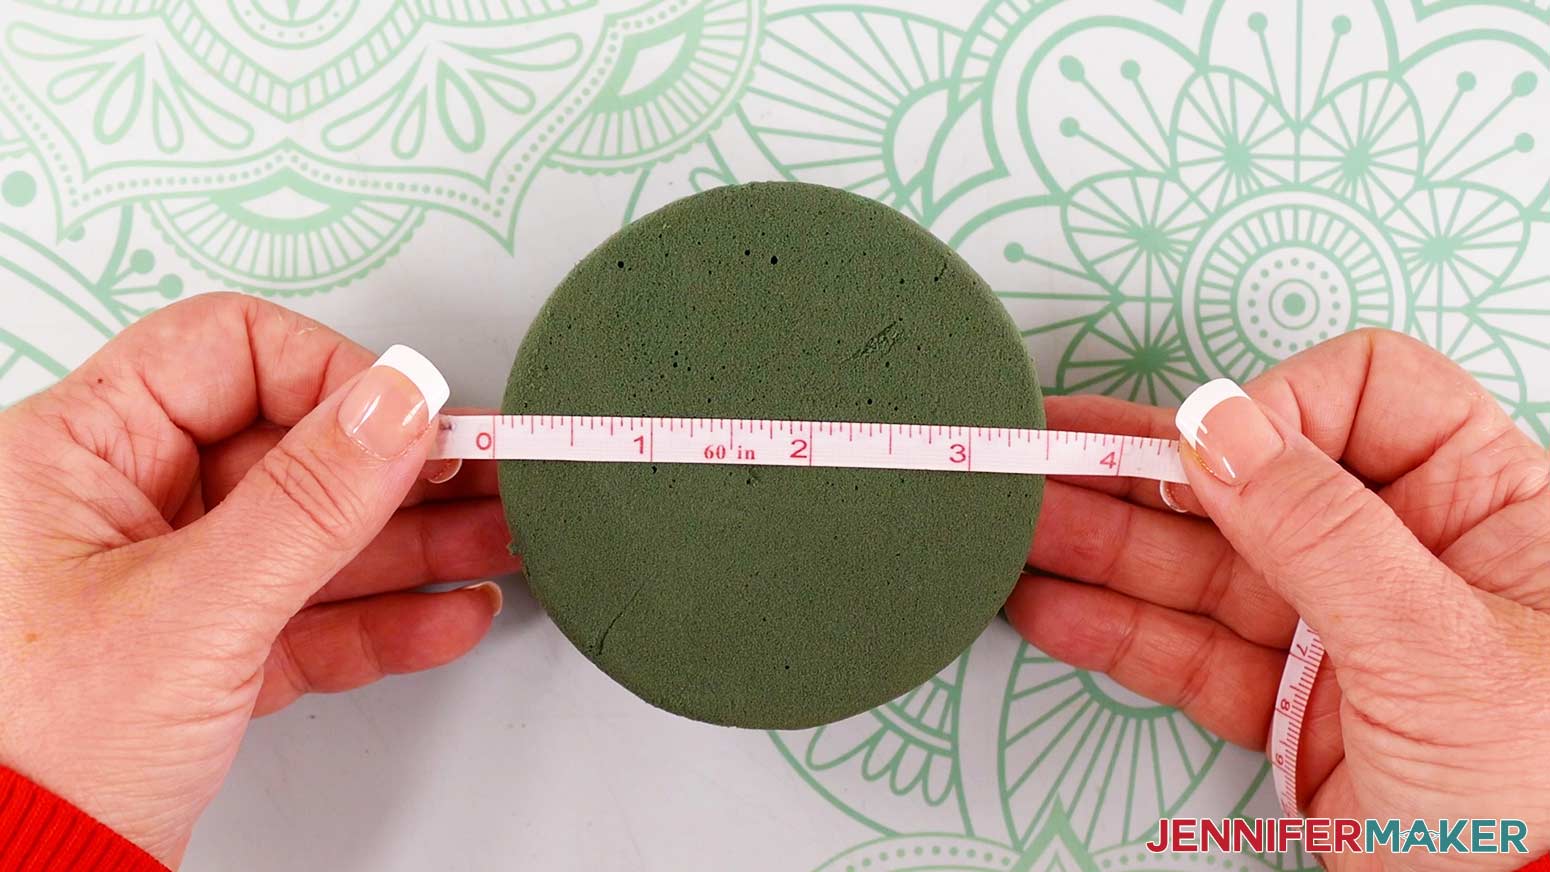 Measure the diameter of the floral foam hemisphere at its base to determine what size your paper flower bouquet vase should be